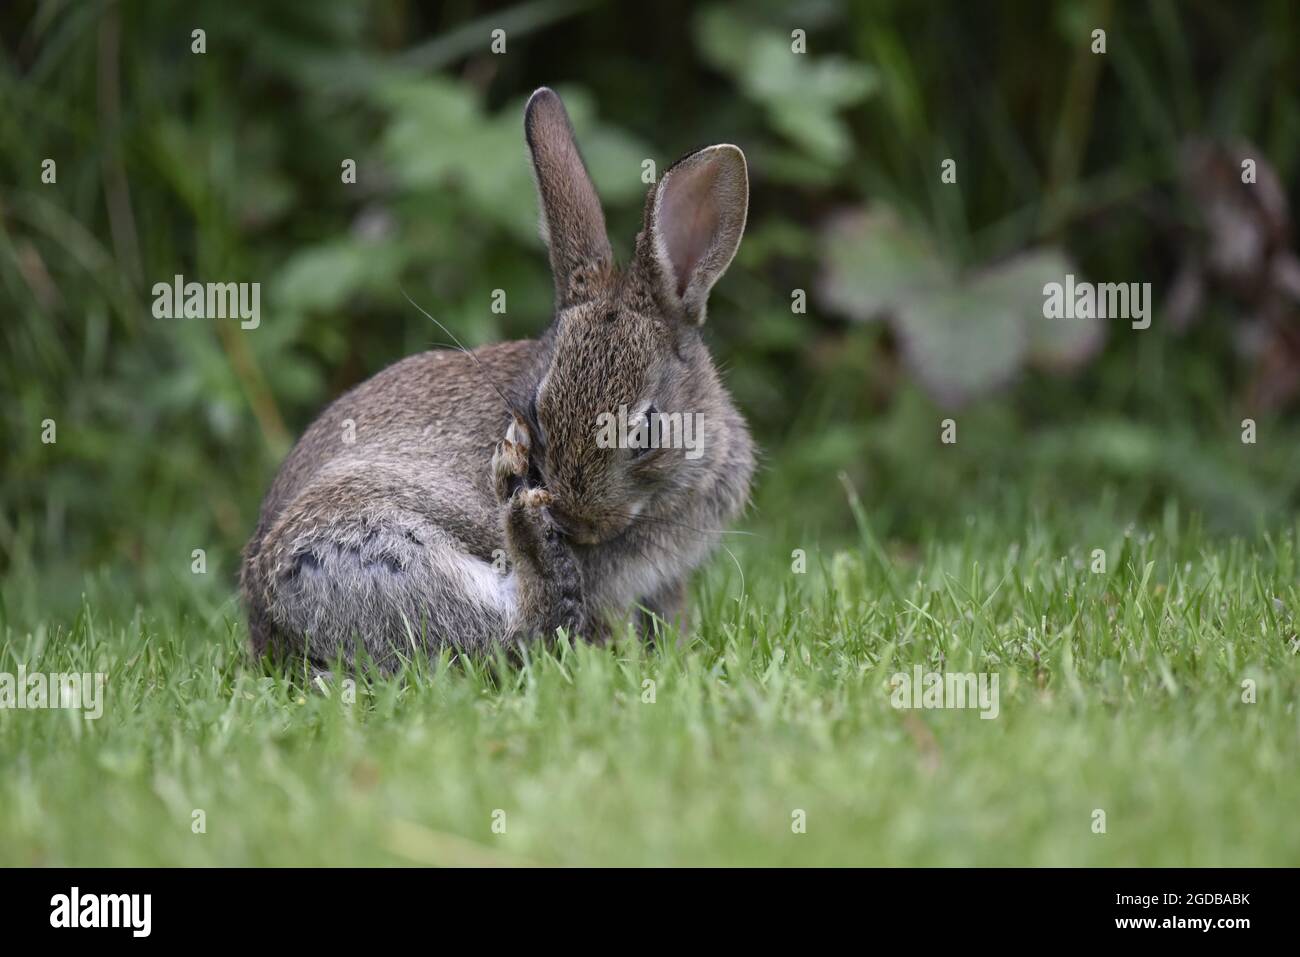 Close-Up Portrait of a Juvenile Wild Rabbit (Oryctolagus cuniculus) Facing the Camera, Washing Whilst Sat on Grass with Hedge in the Background in UK Stock Photo